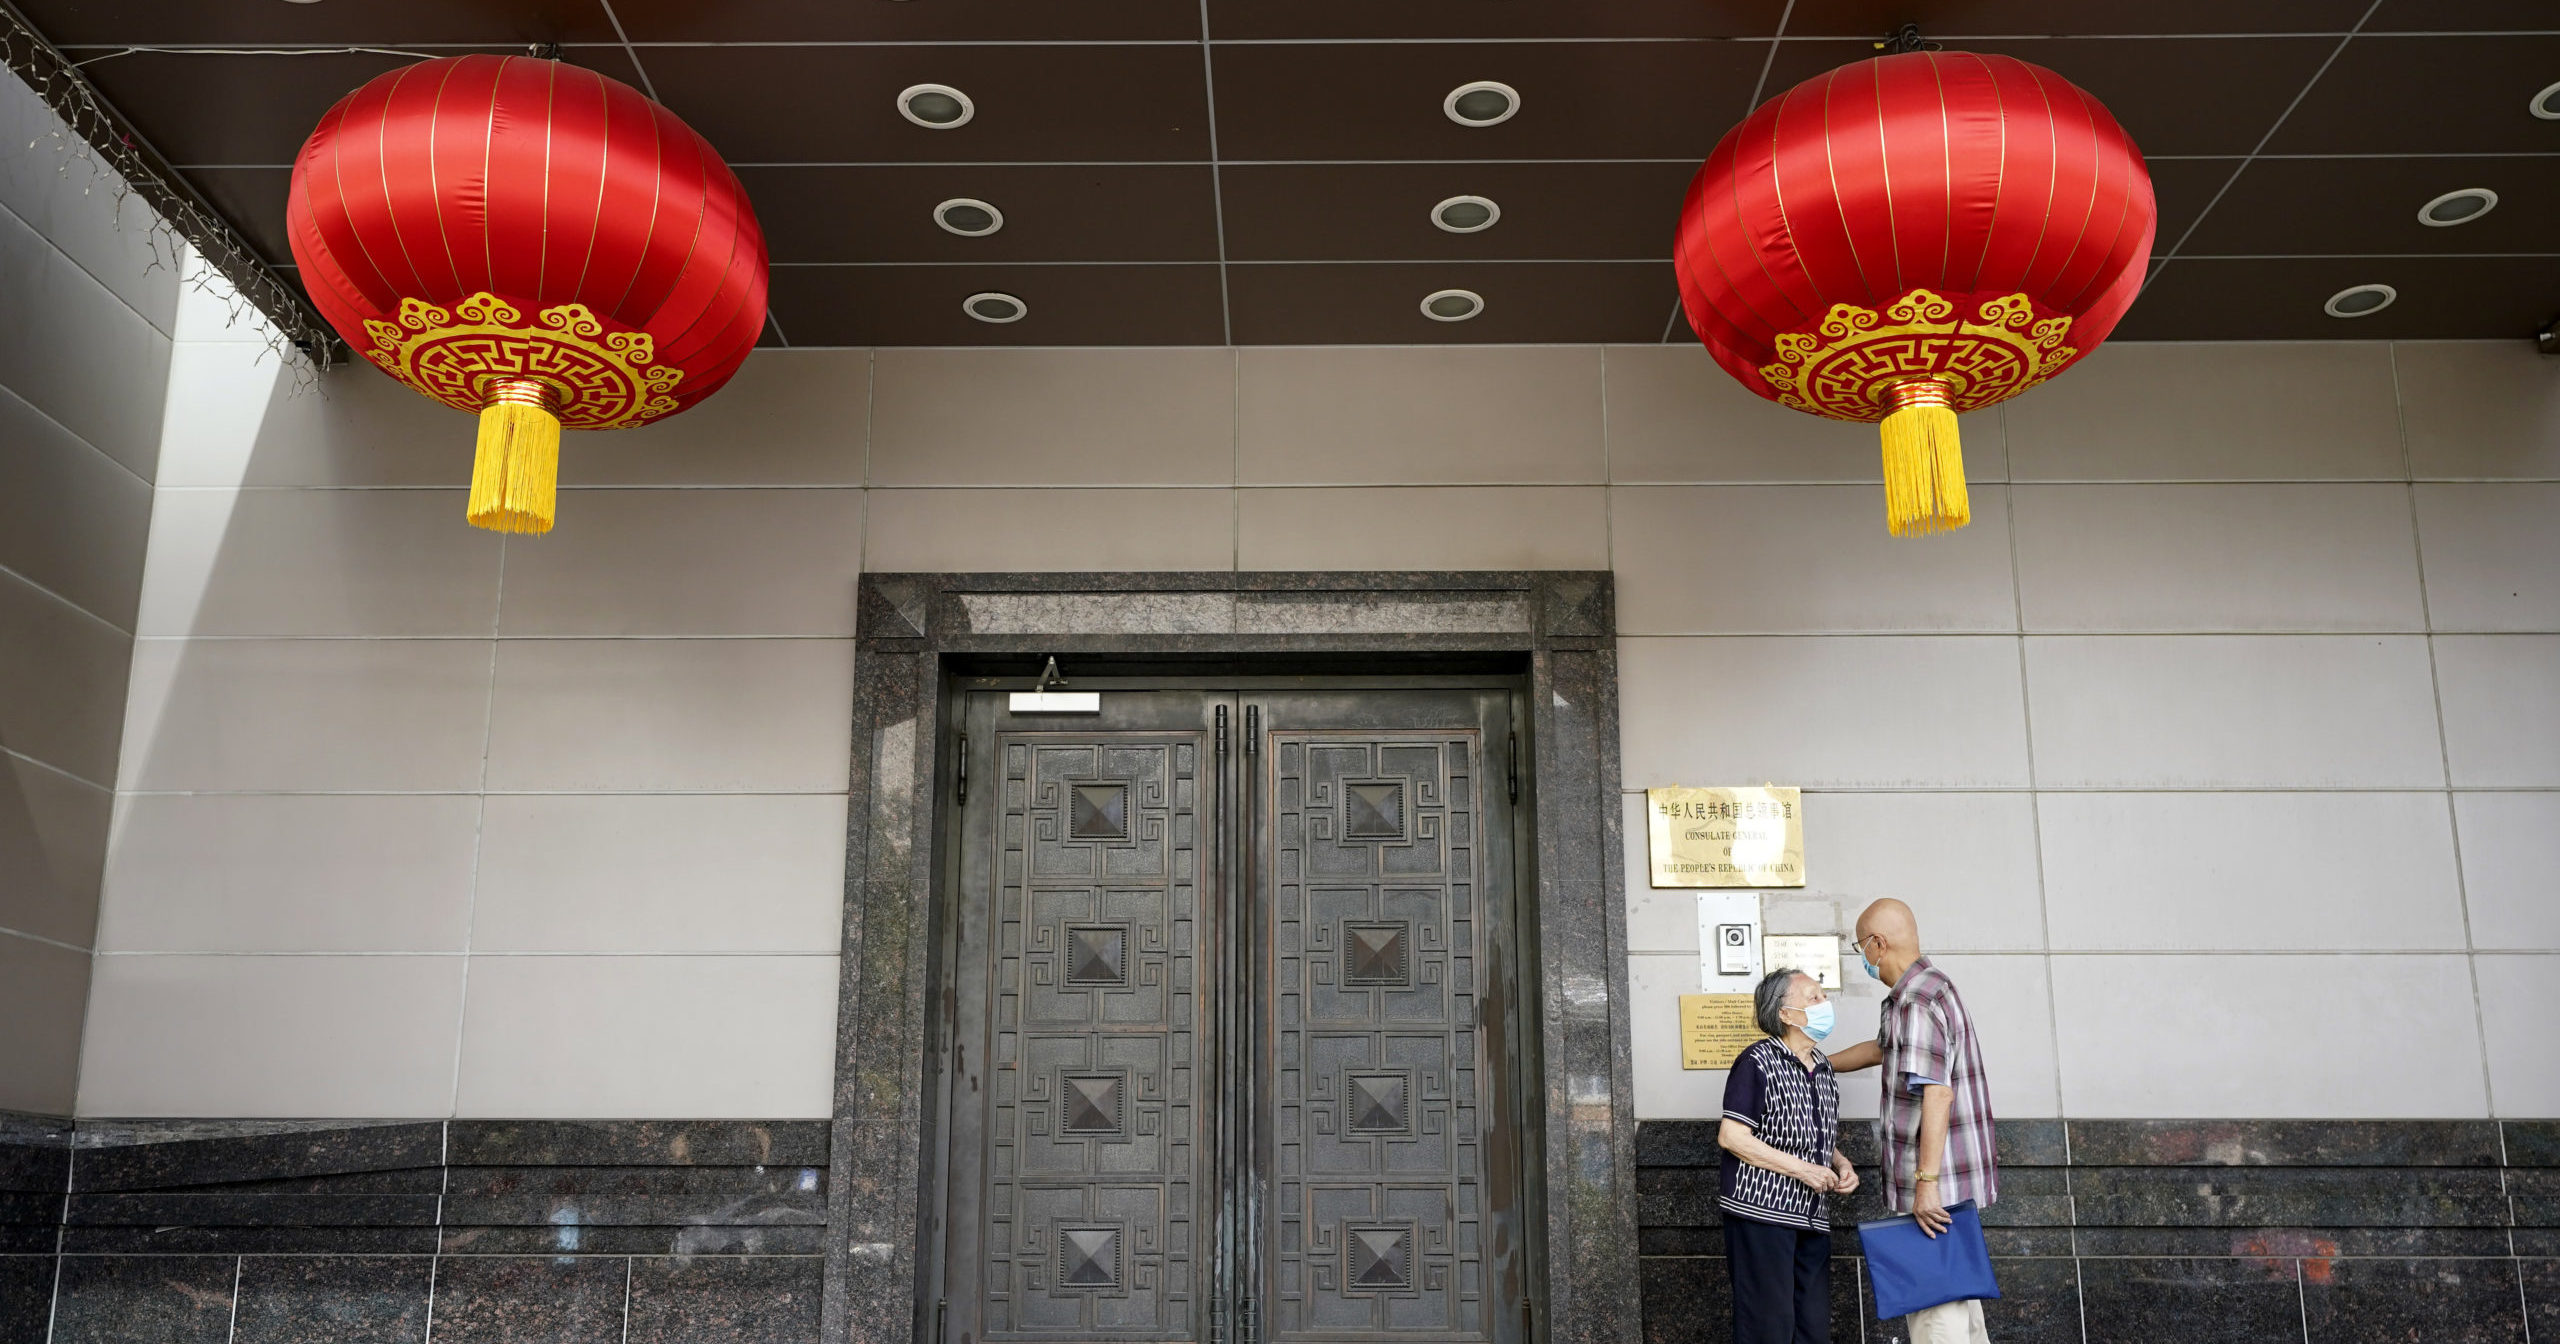 Visitors try to enter the Chinese consulate on July 22, 2020, in Houston. The U.S. has ordered the consulate to close in what China called a provocation that violates international law.